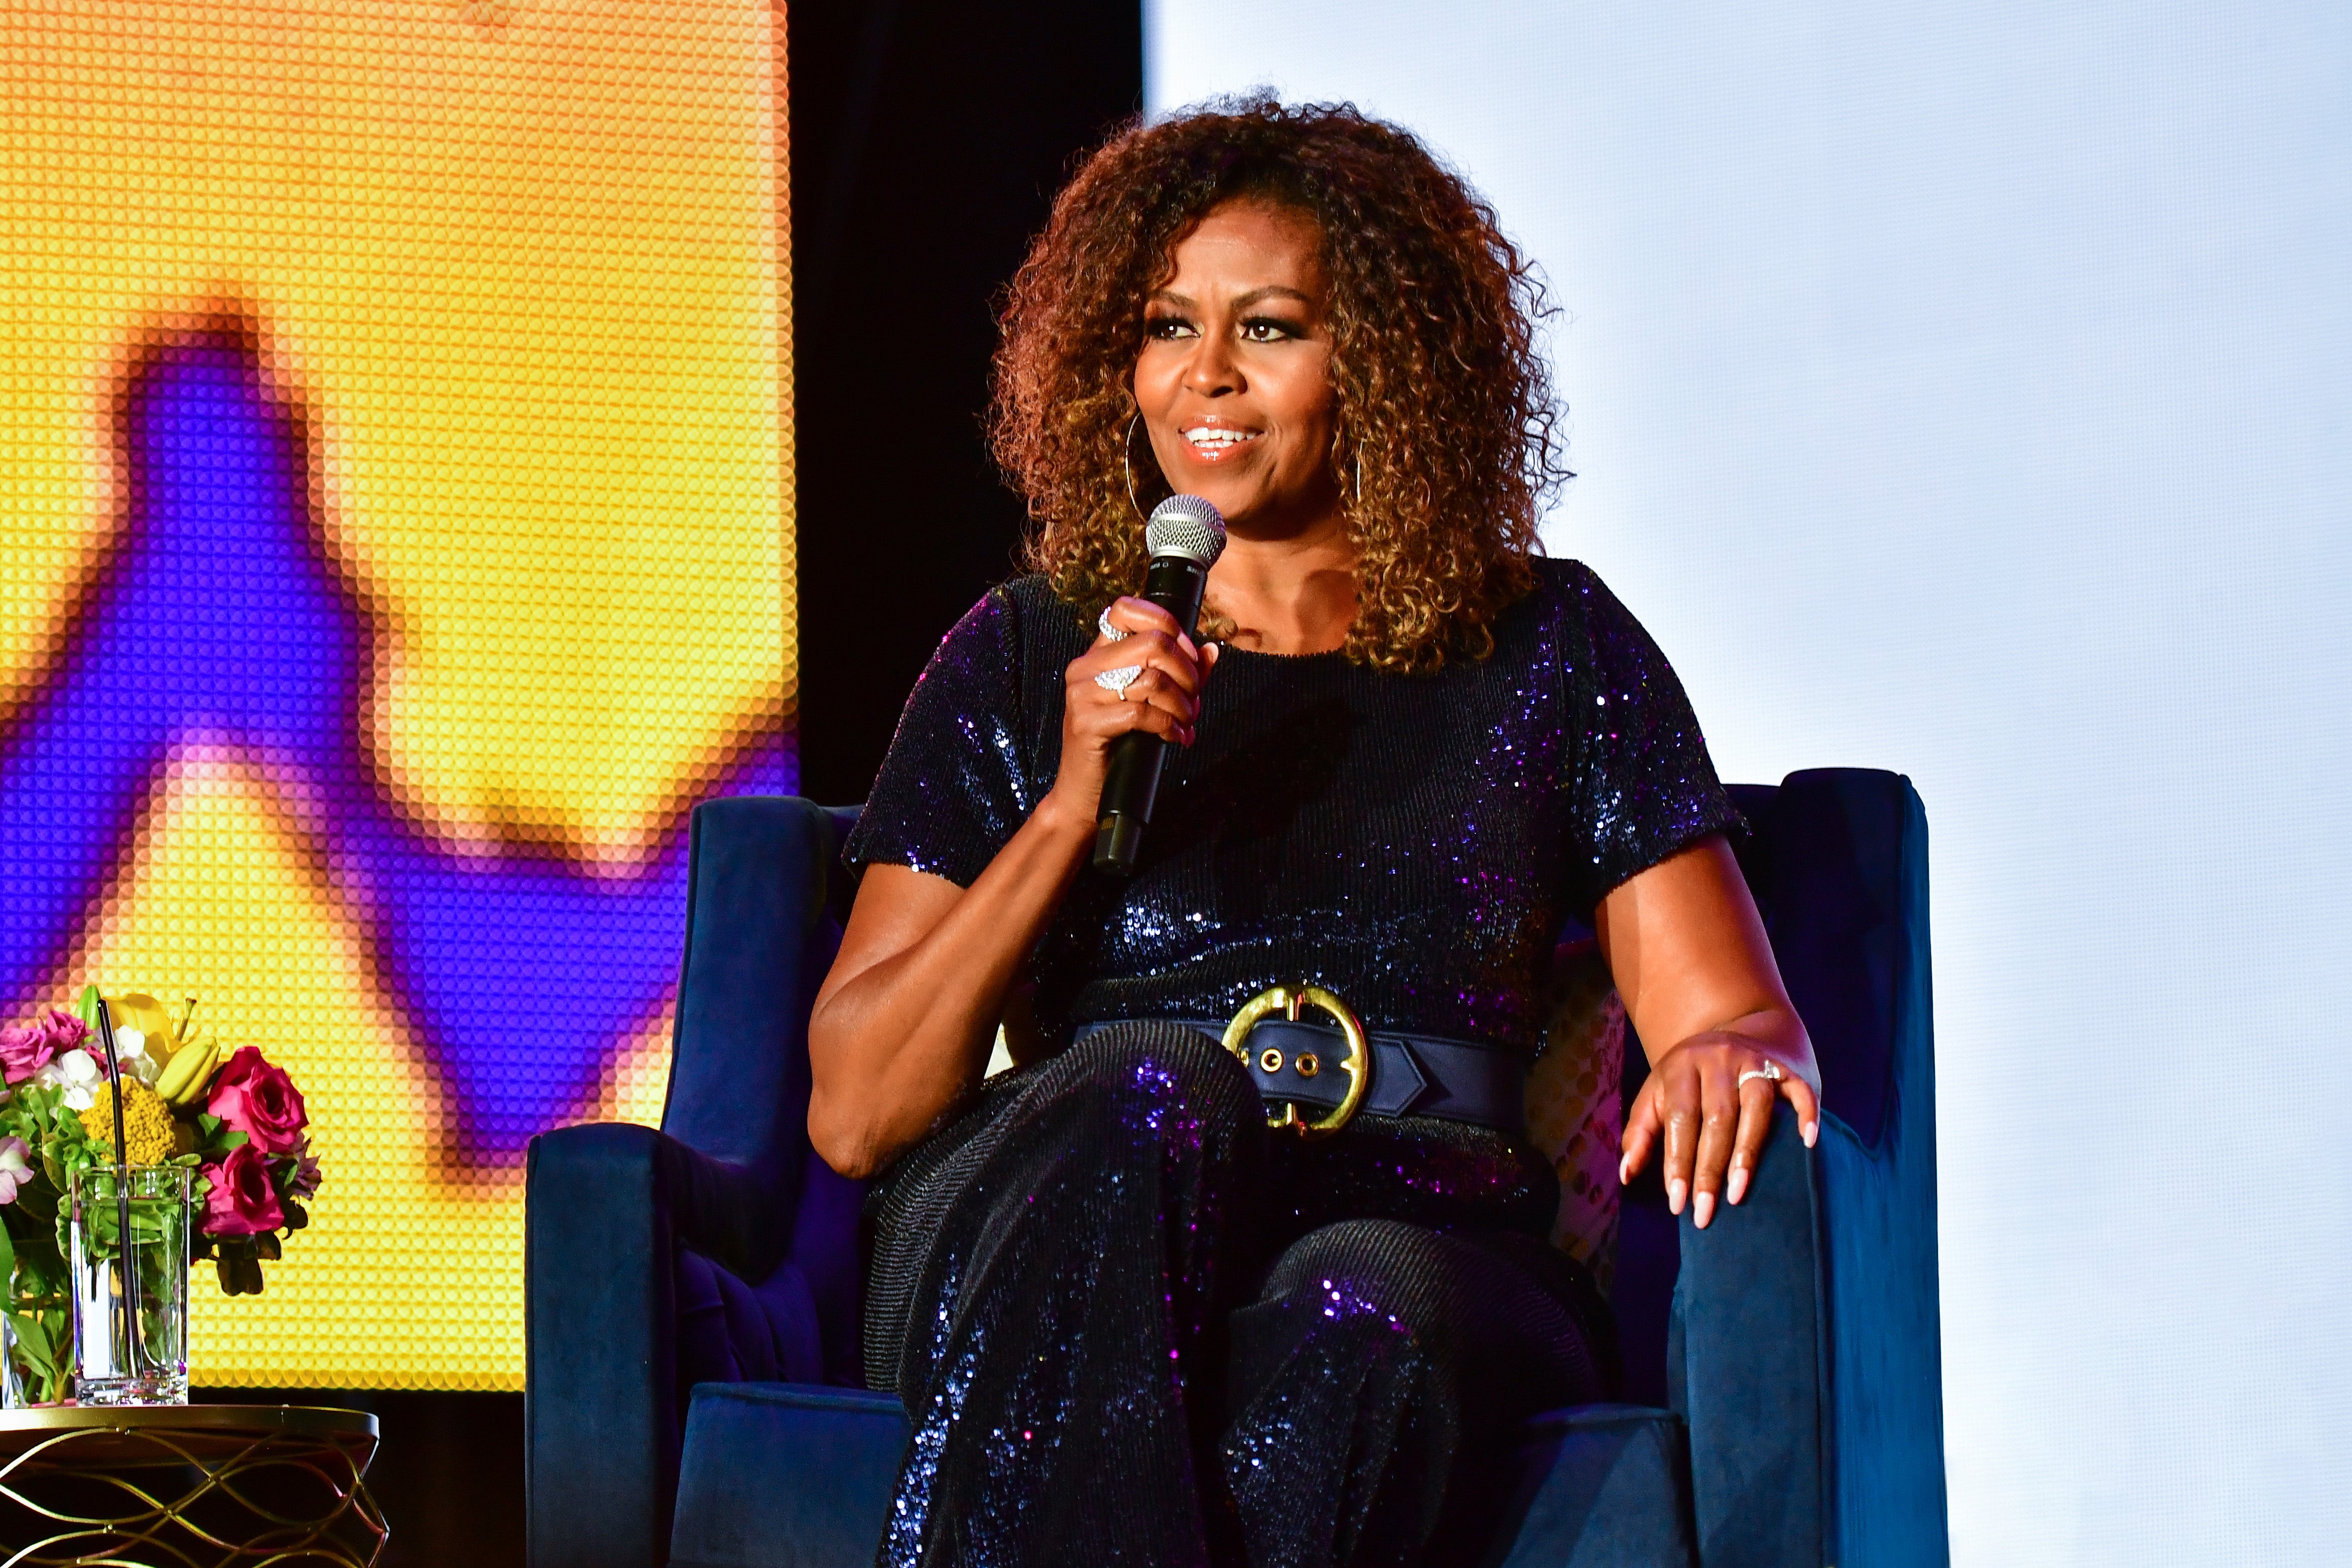 Get The Look! Here's Where to Snag Michelle Obama's Essence Festival Sequin Jumpsuit